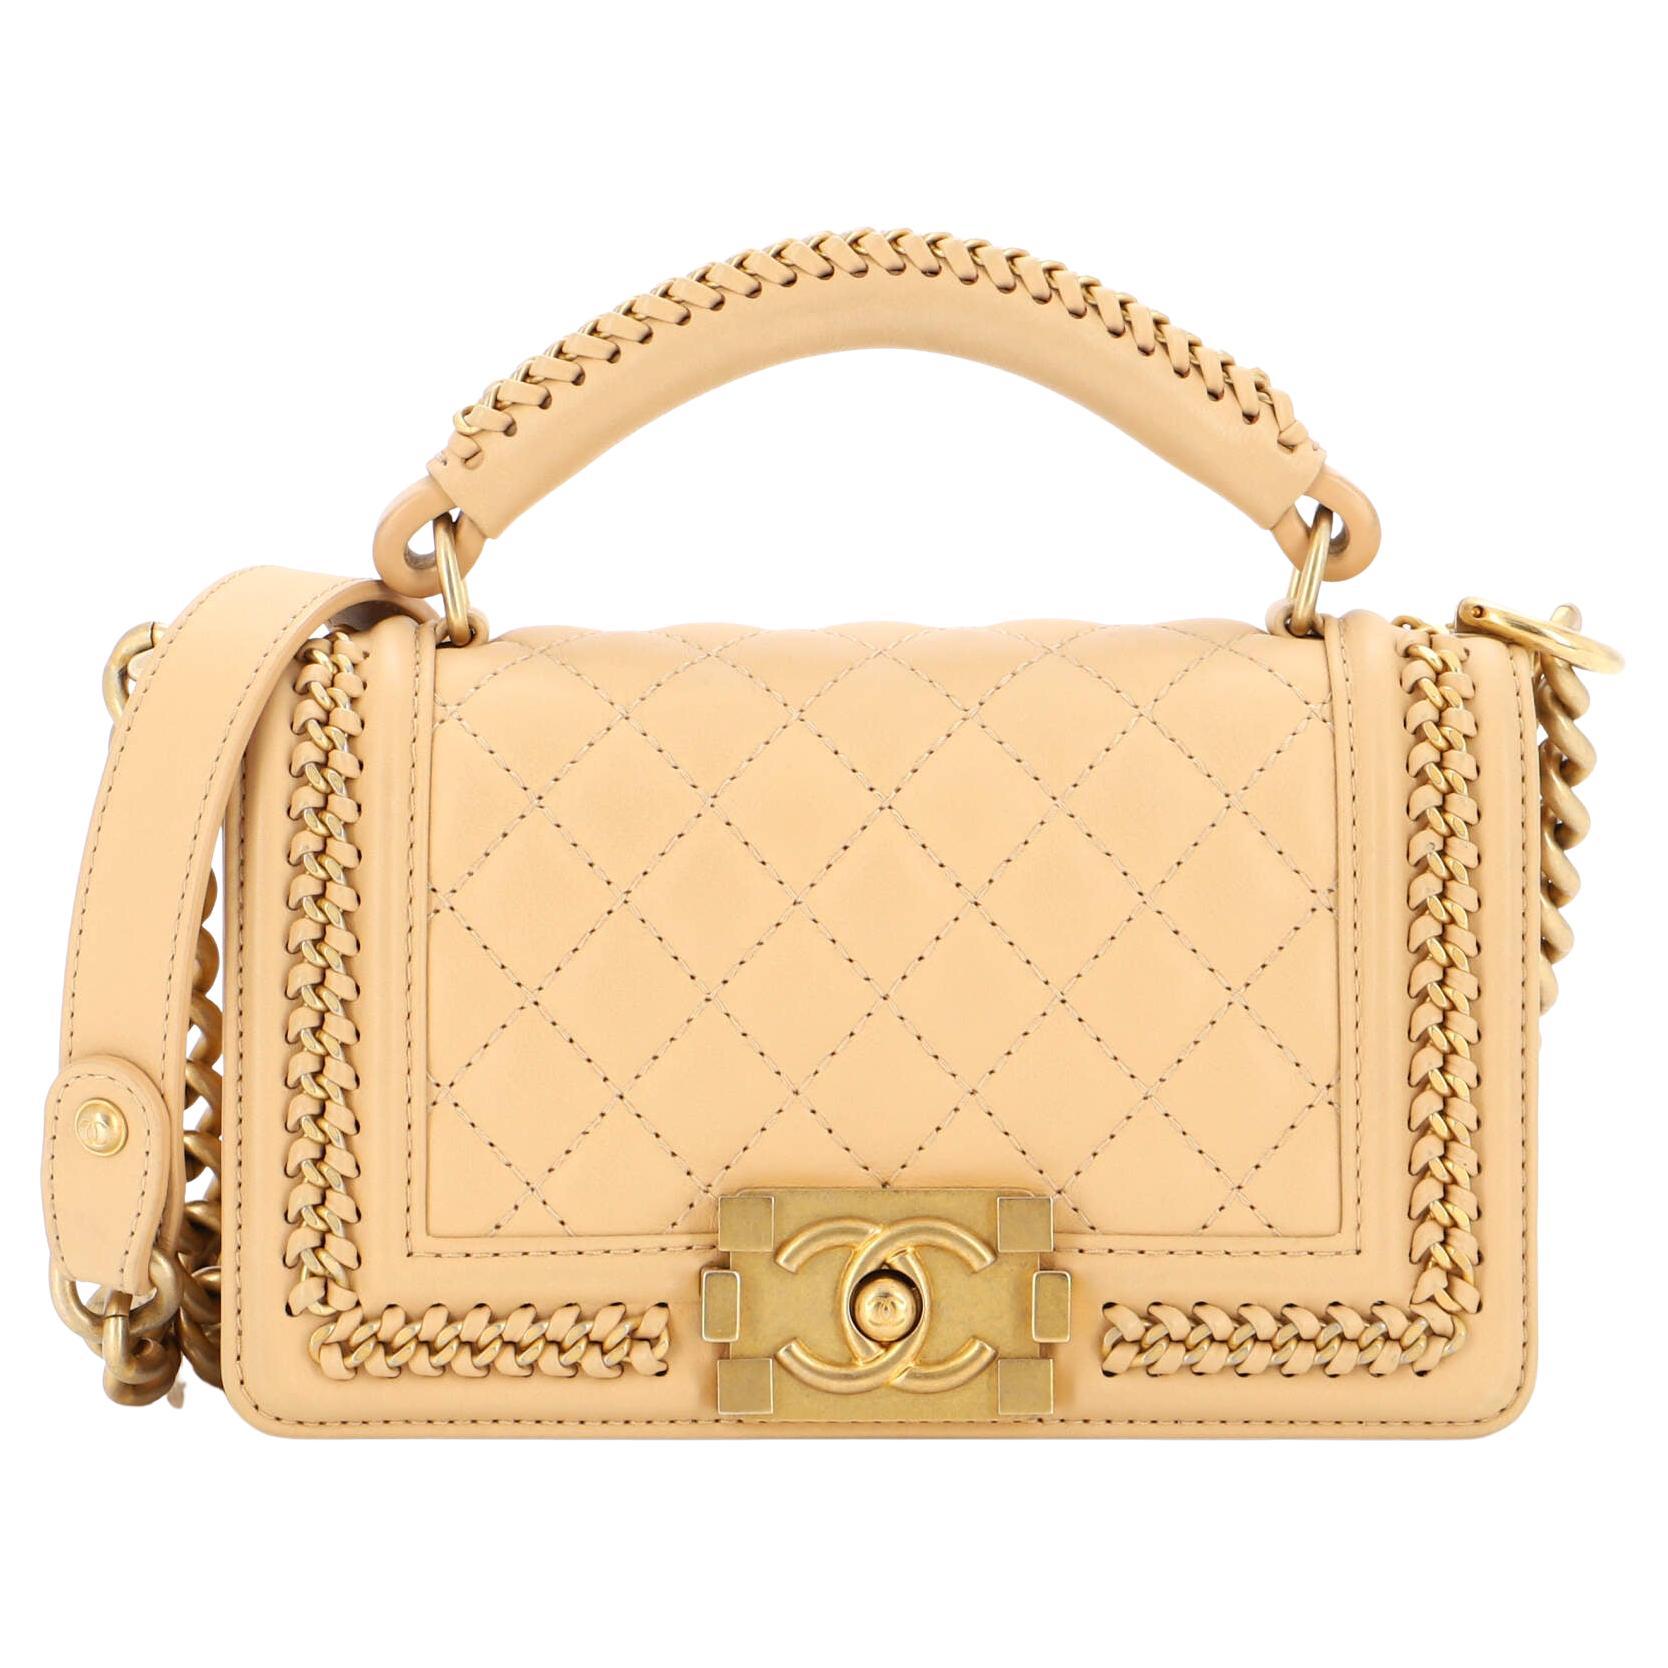 CHANEL CHANEL Boy Small Bags & Handbags for Women, Authenticity Guaranteed